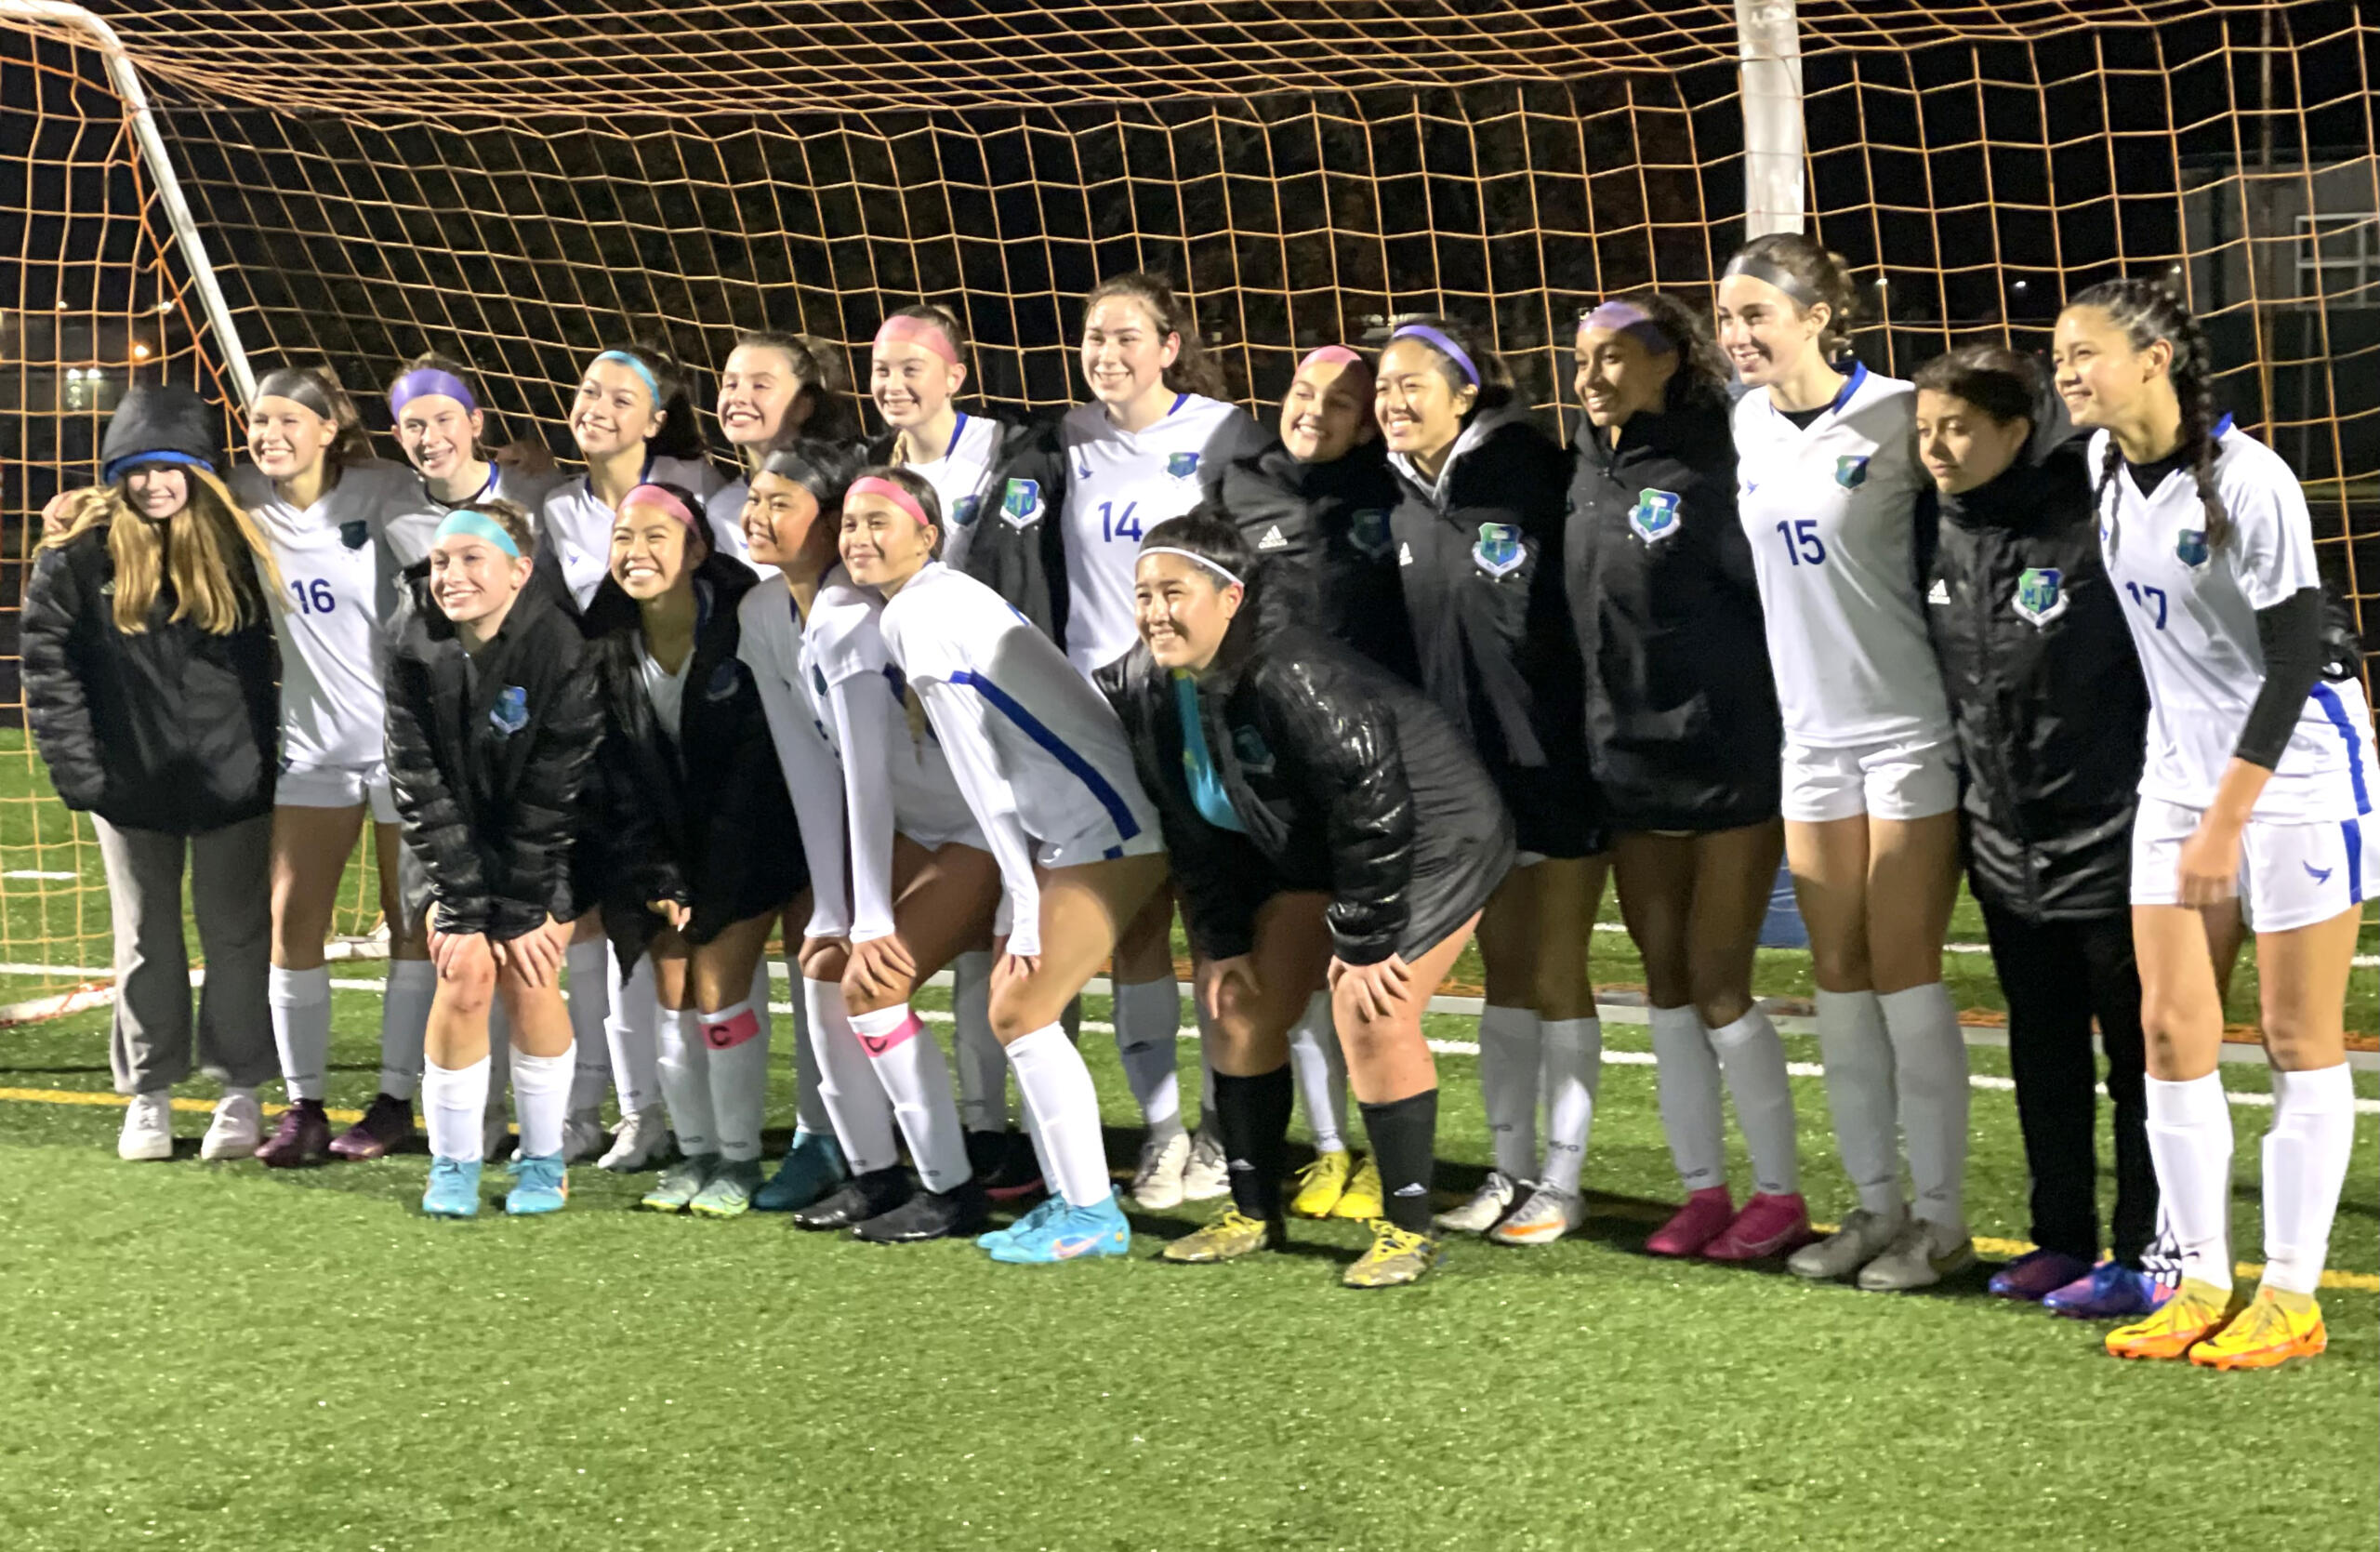 Mountain View players pose for a photo after defeating Kelso 2-0 in the 3A bi-district girls soccer game on Nov. 3, 2022, at District Stadium in Battle Ground.